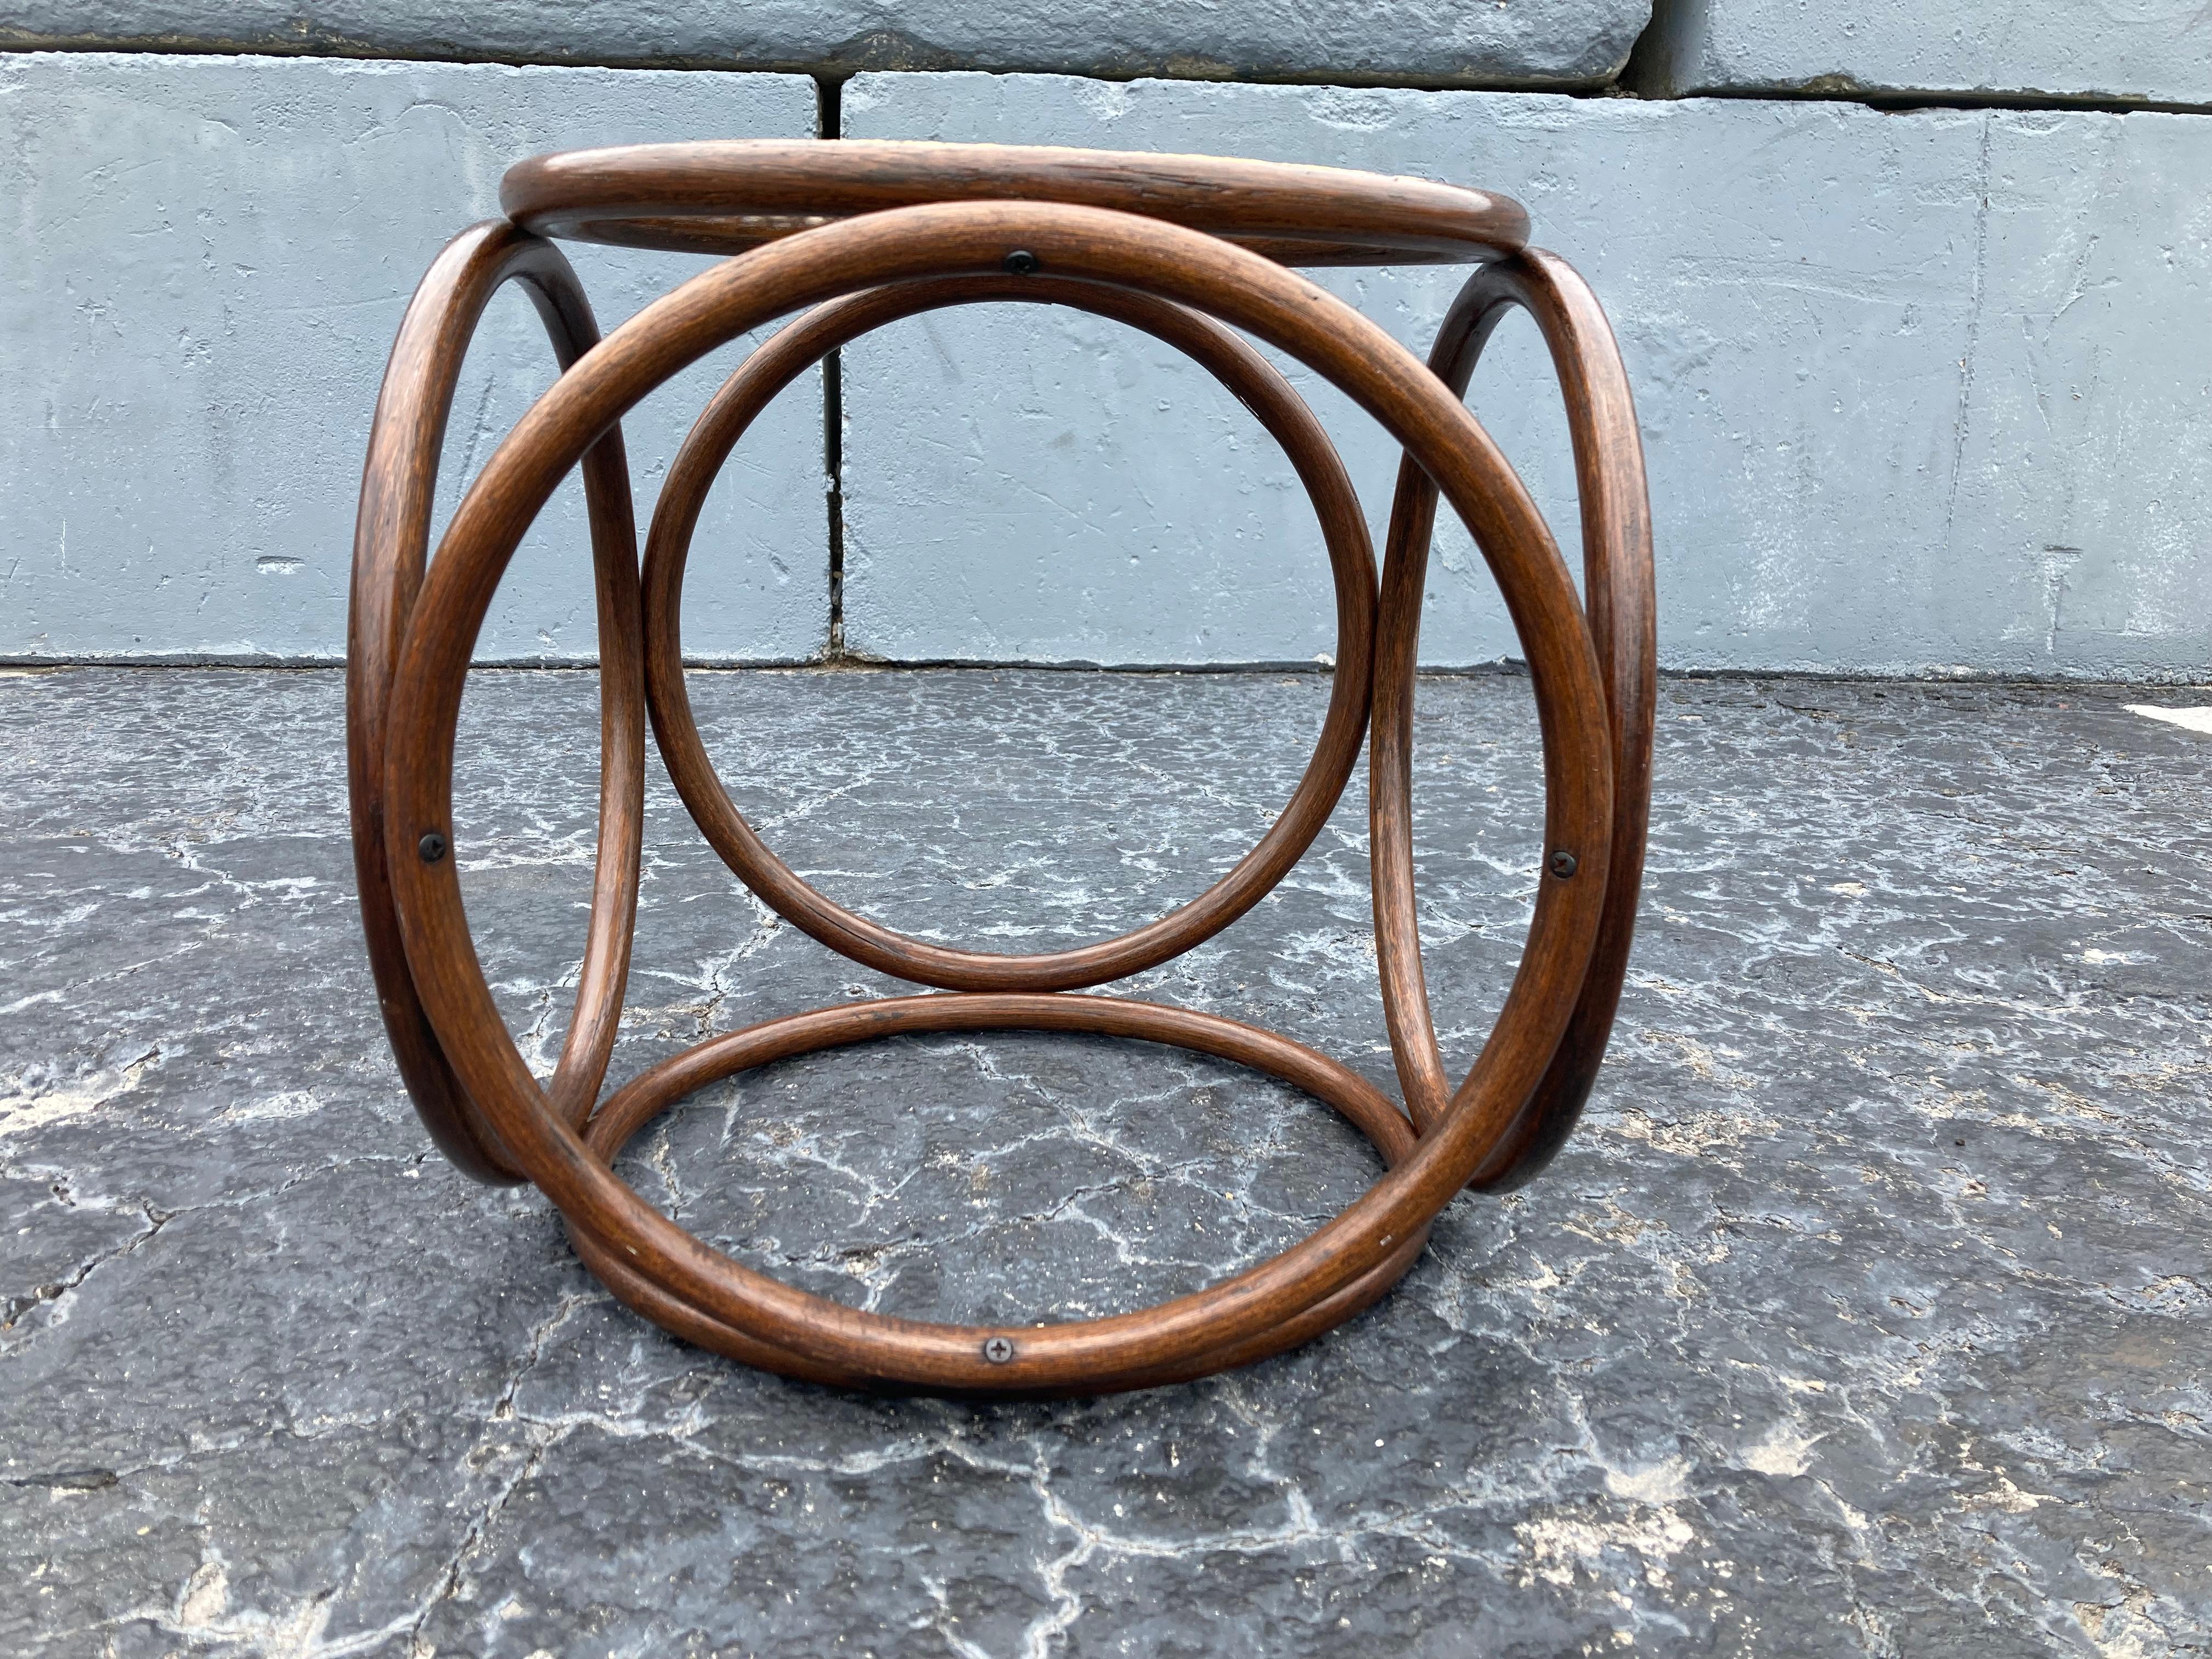 Timeless design, bentwood and cane. Great as stool or side table.